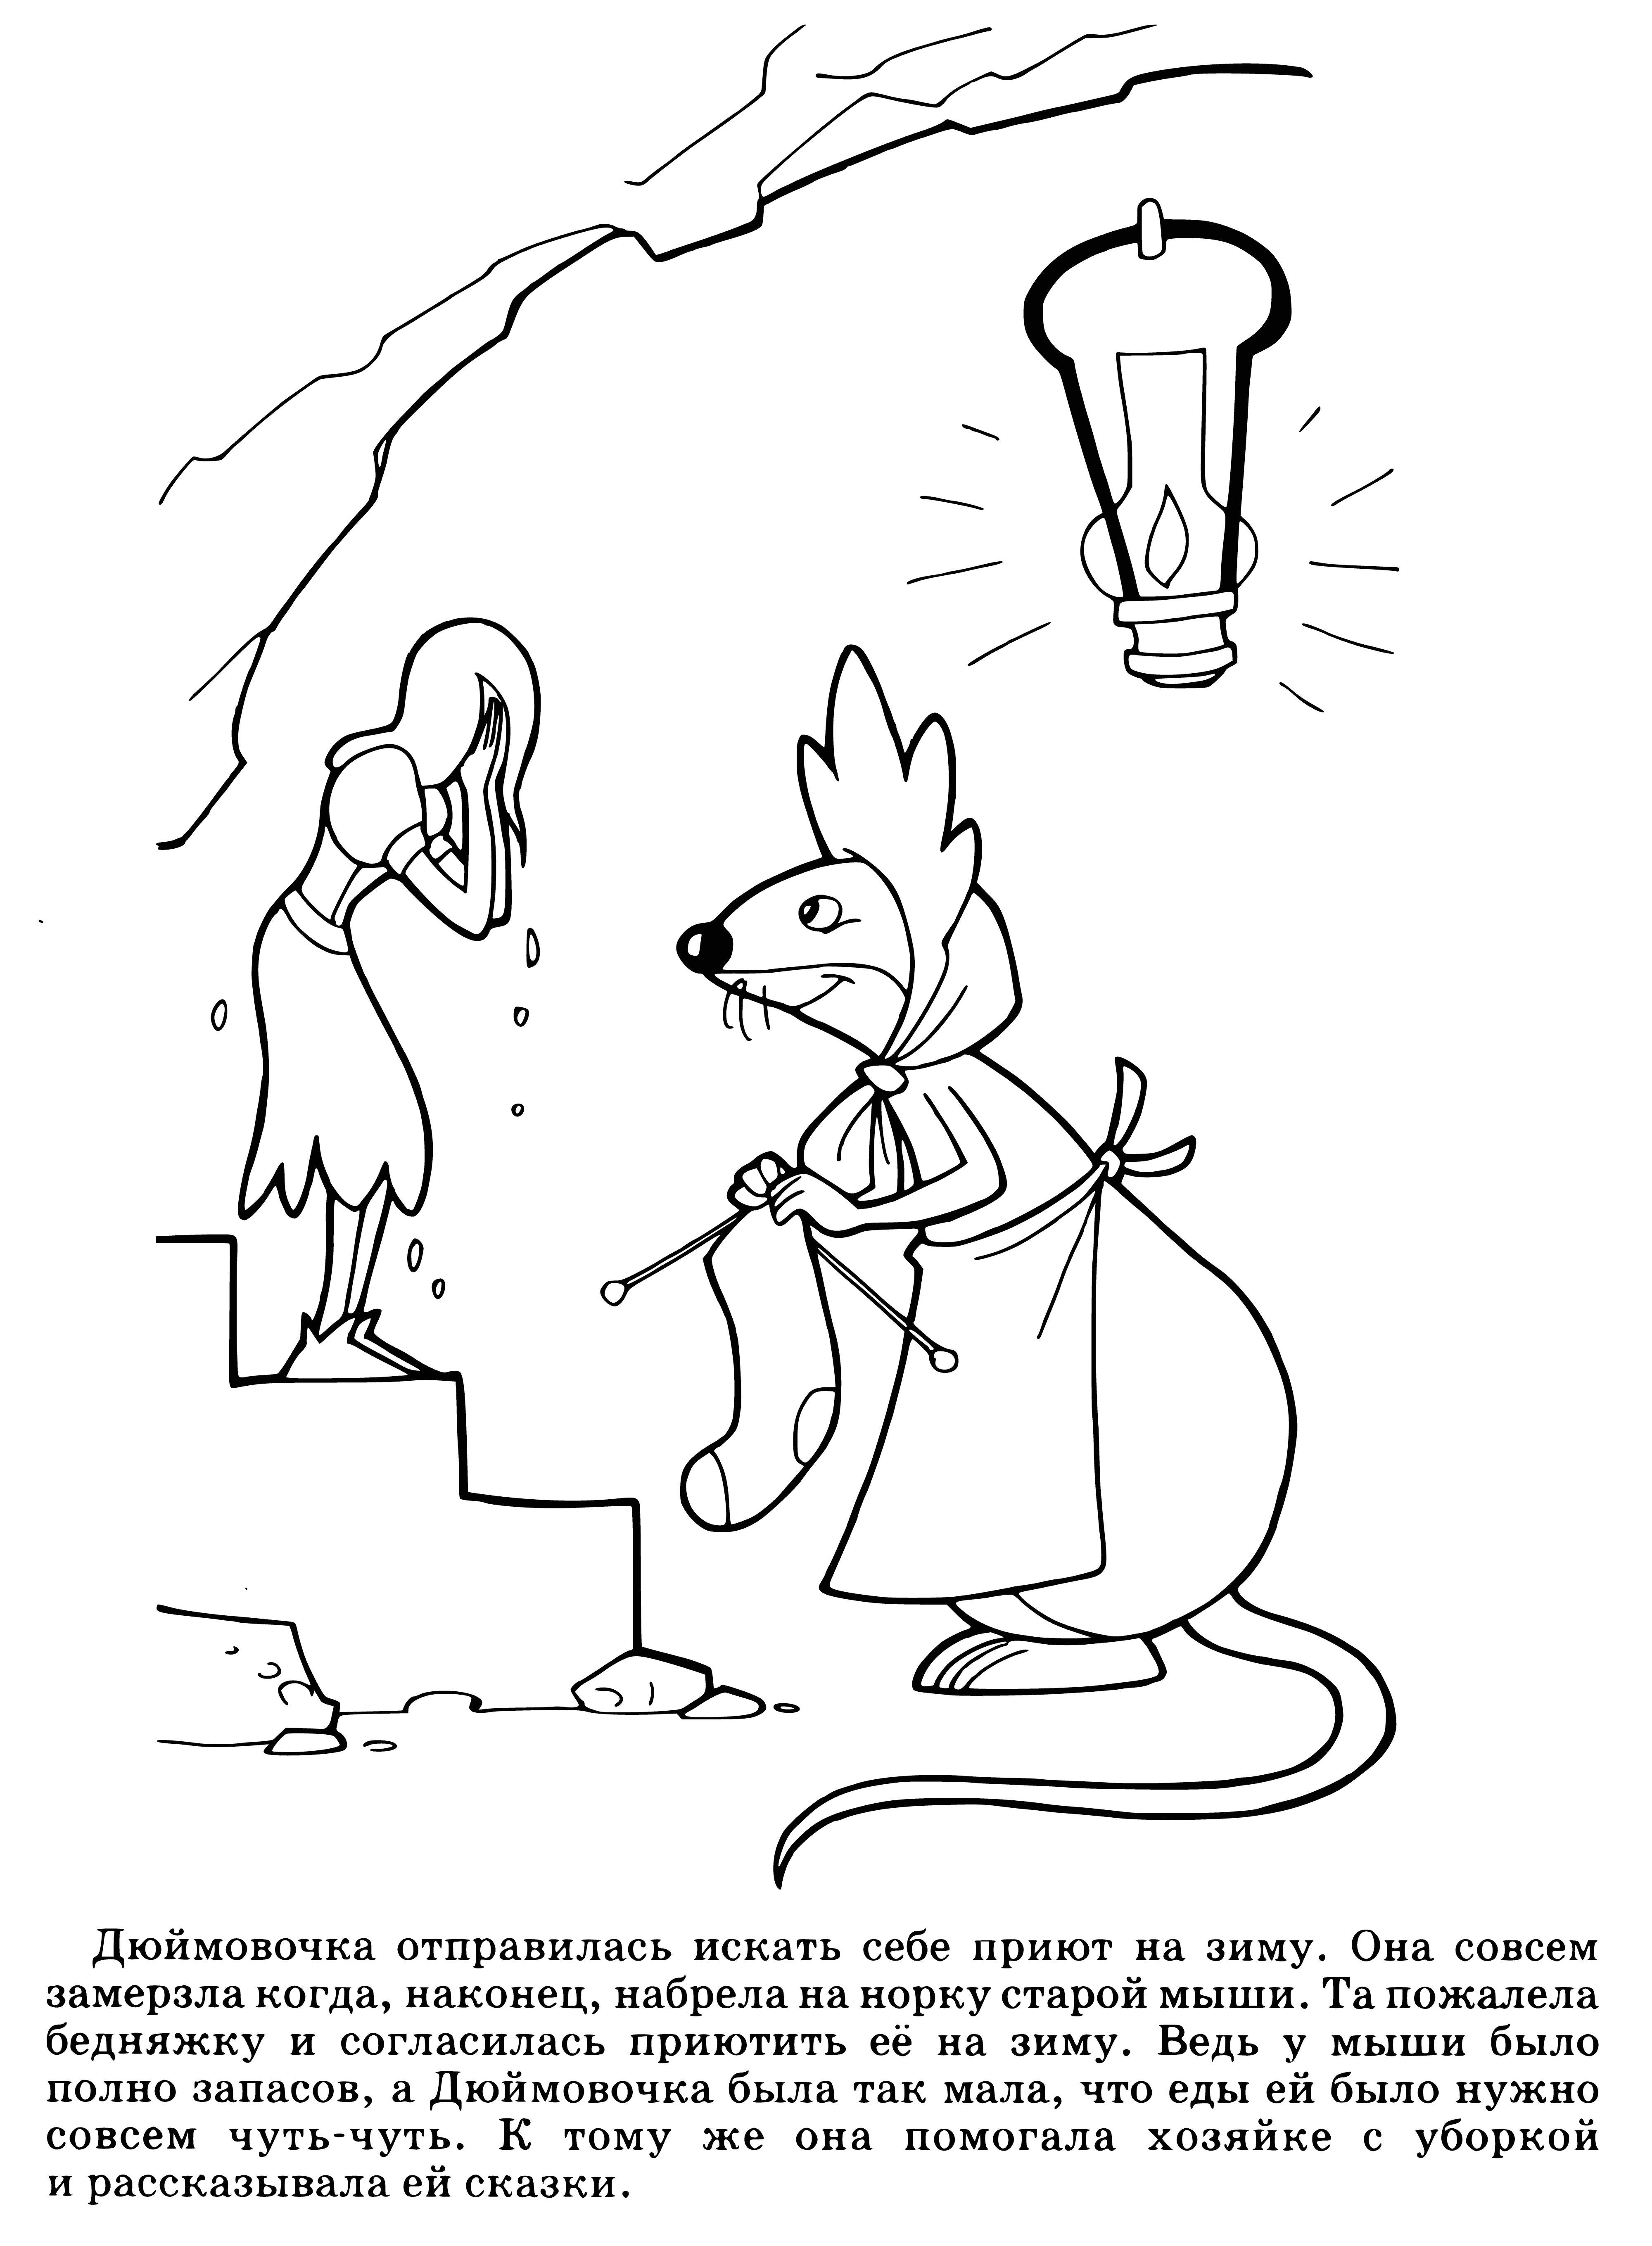 coloring page: Small mouse stands on hind legs, looking at open book w/front paws; sportin' a small red bow in her hair. #mouseonthemove #LovelyMouse